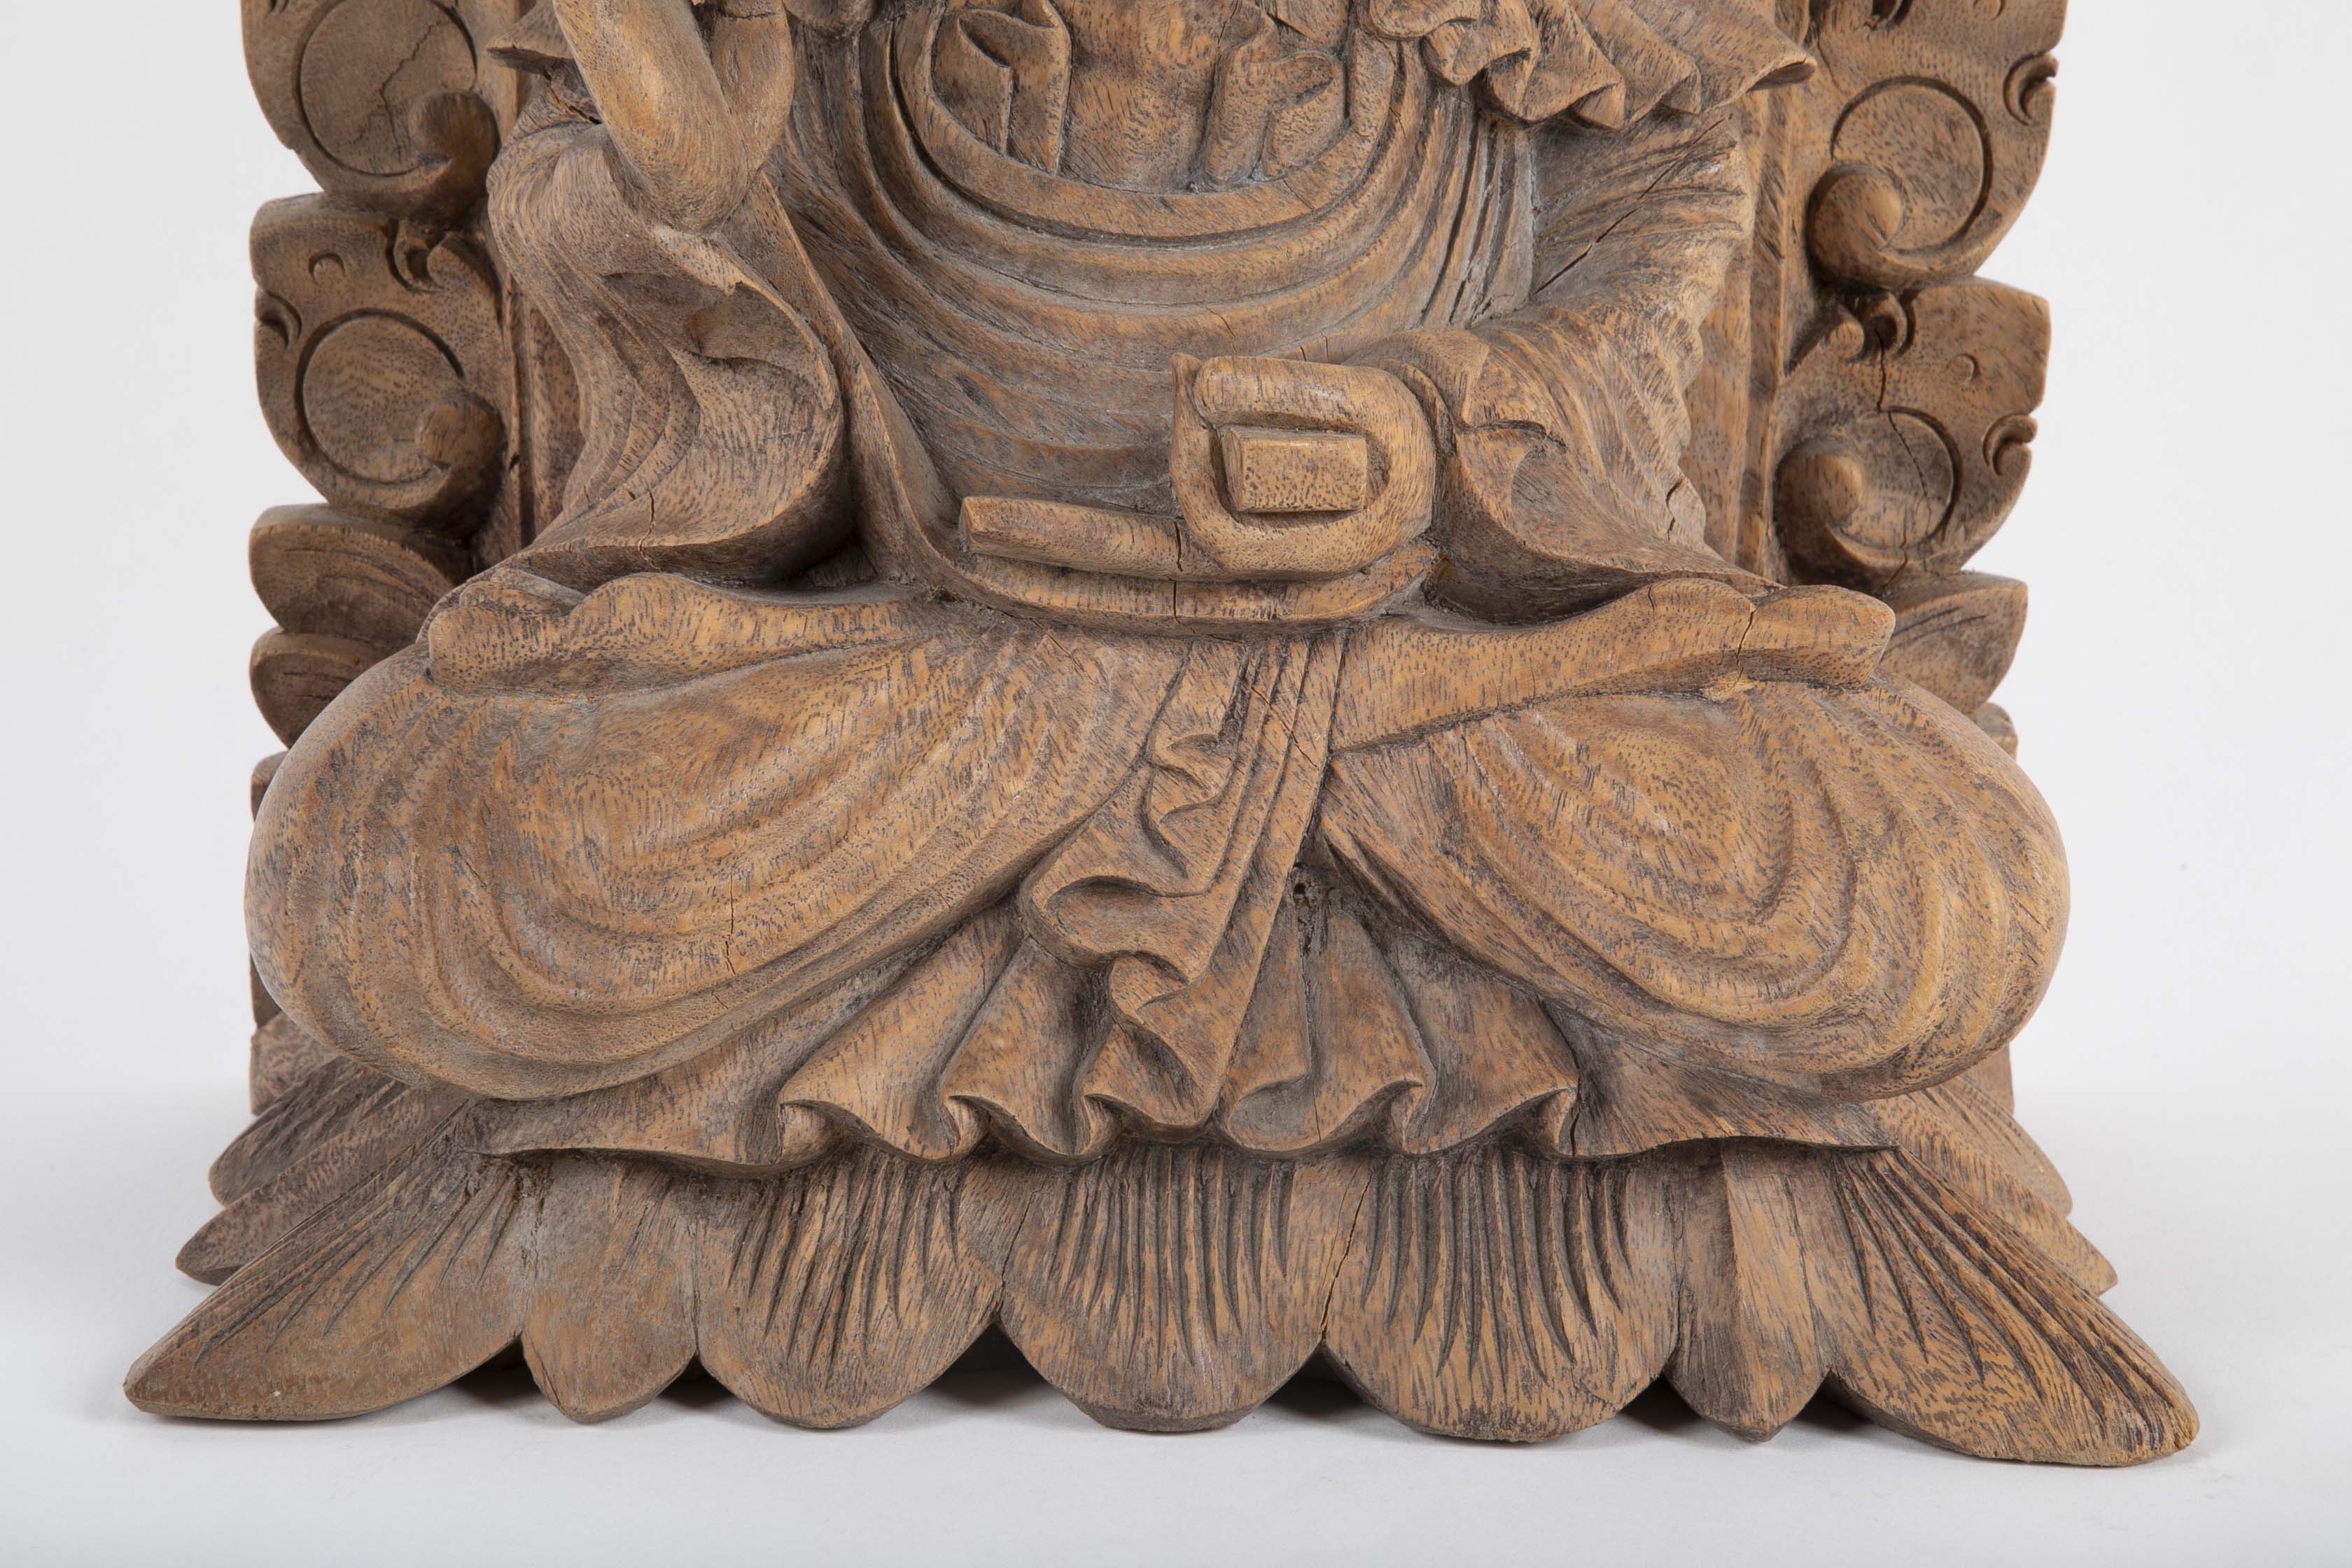 Chinese Carved Wooden Buddha